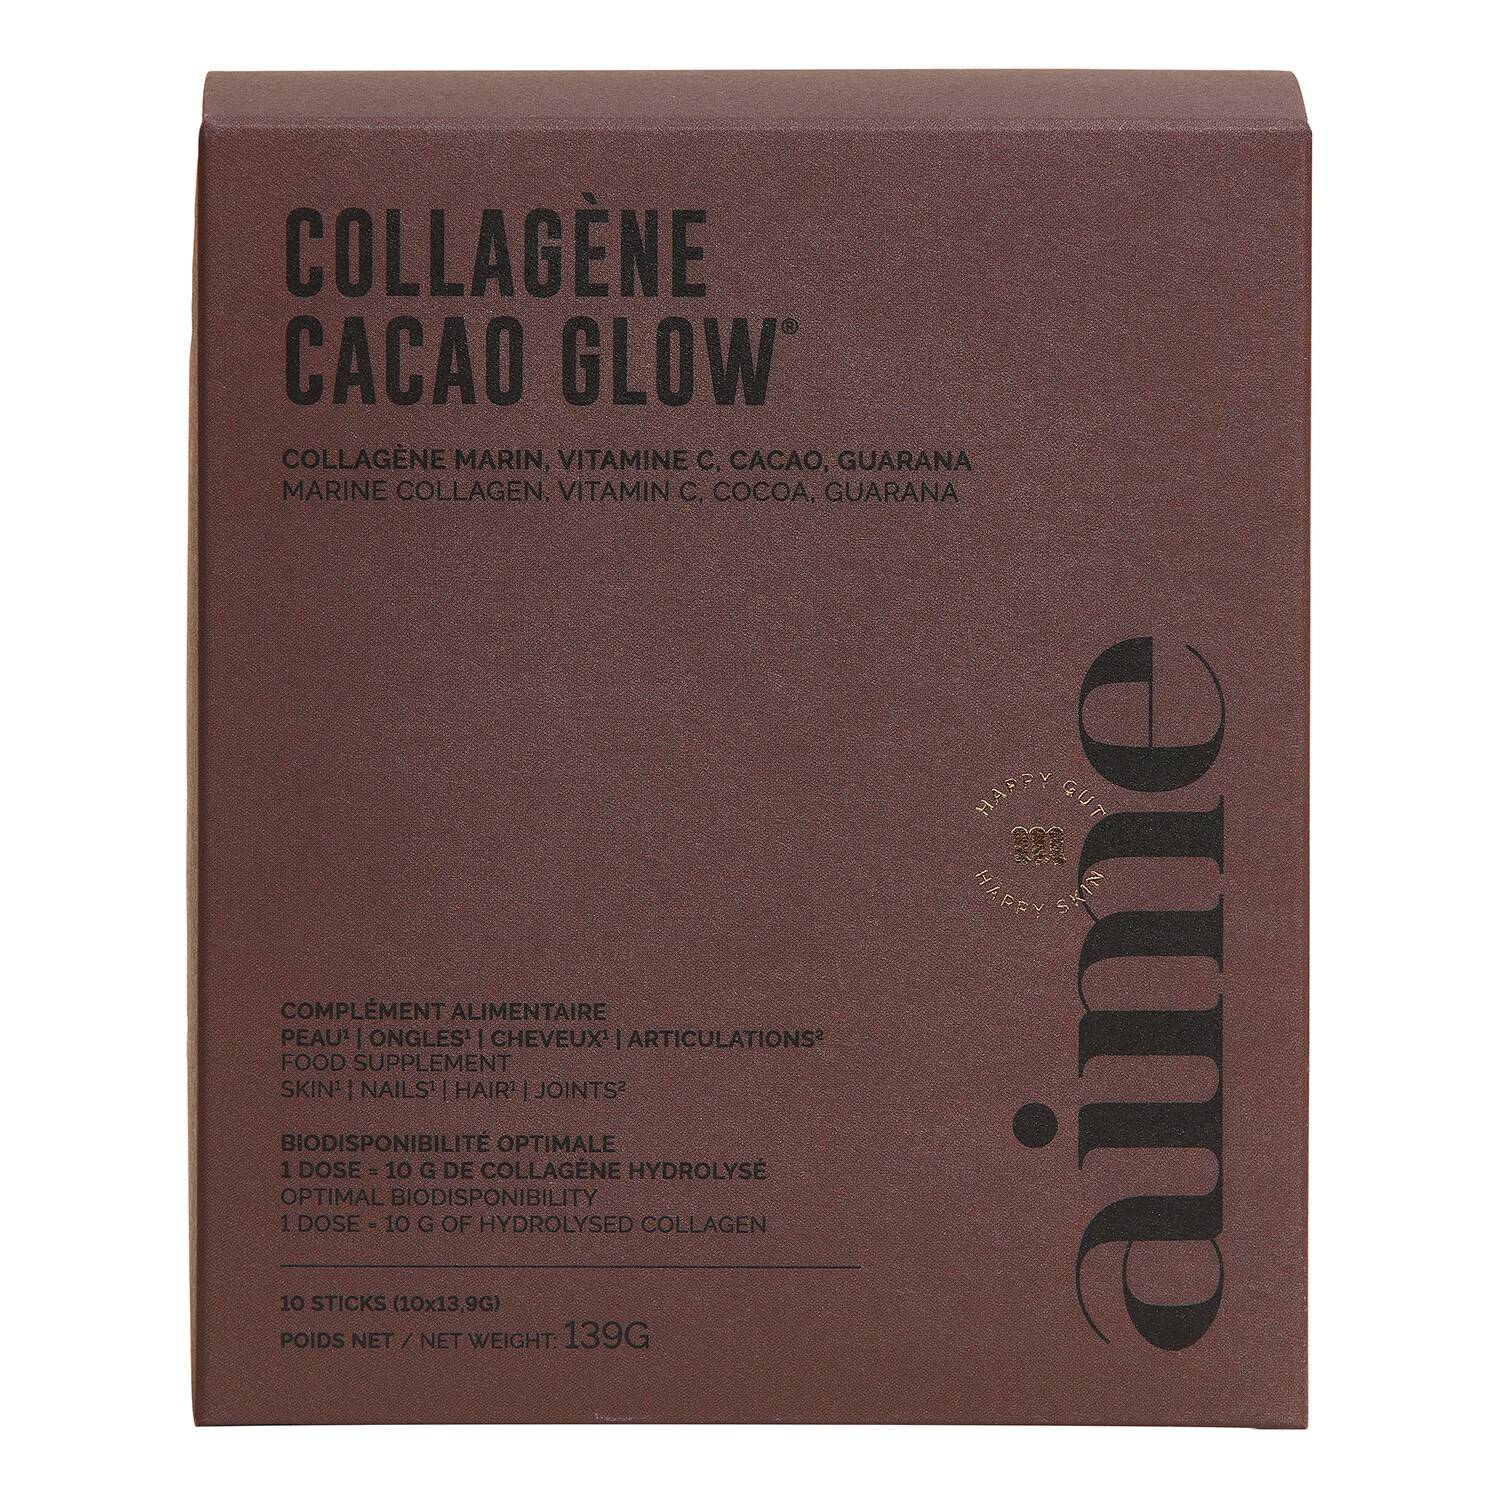 Aime Collagene Cacao Glow Food Supplements Box Of 10 Sticks